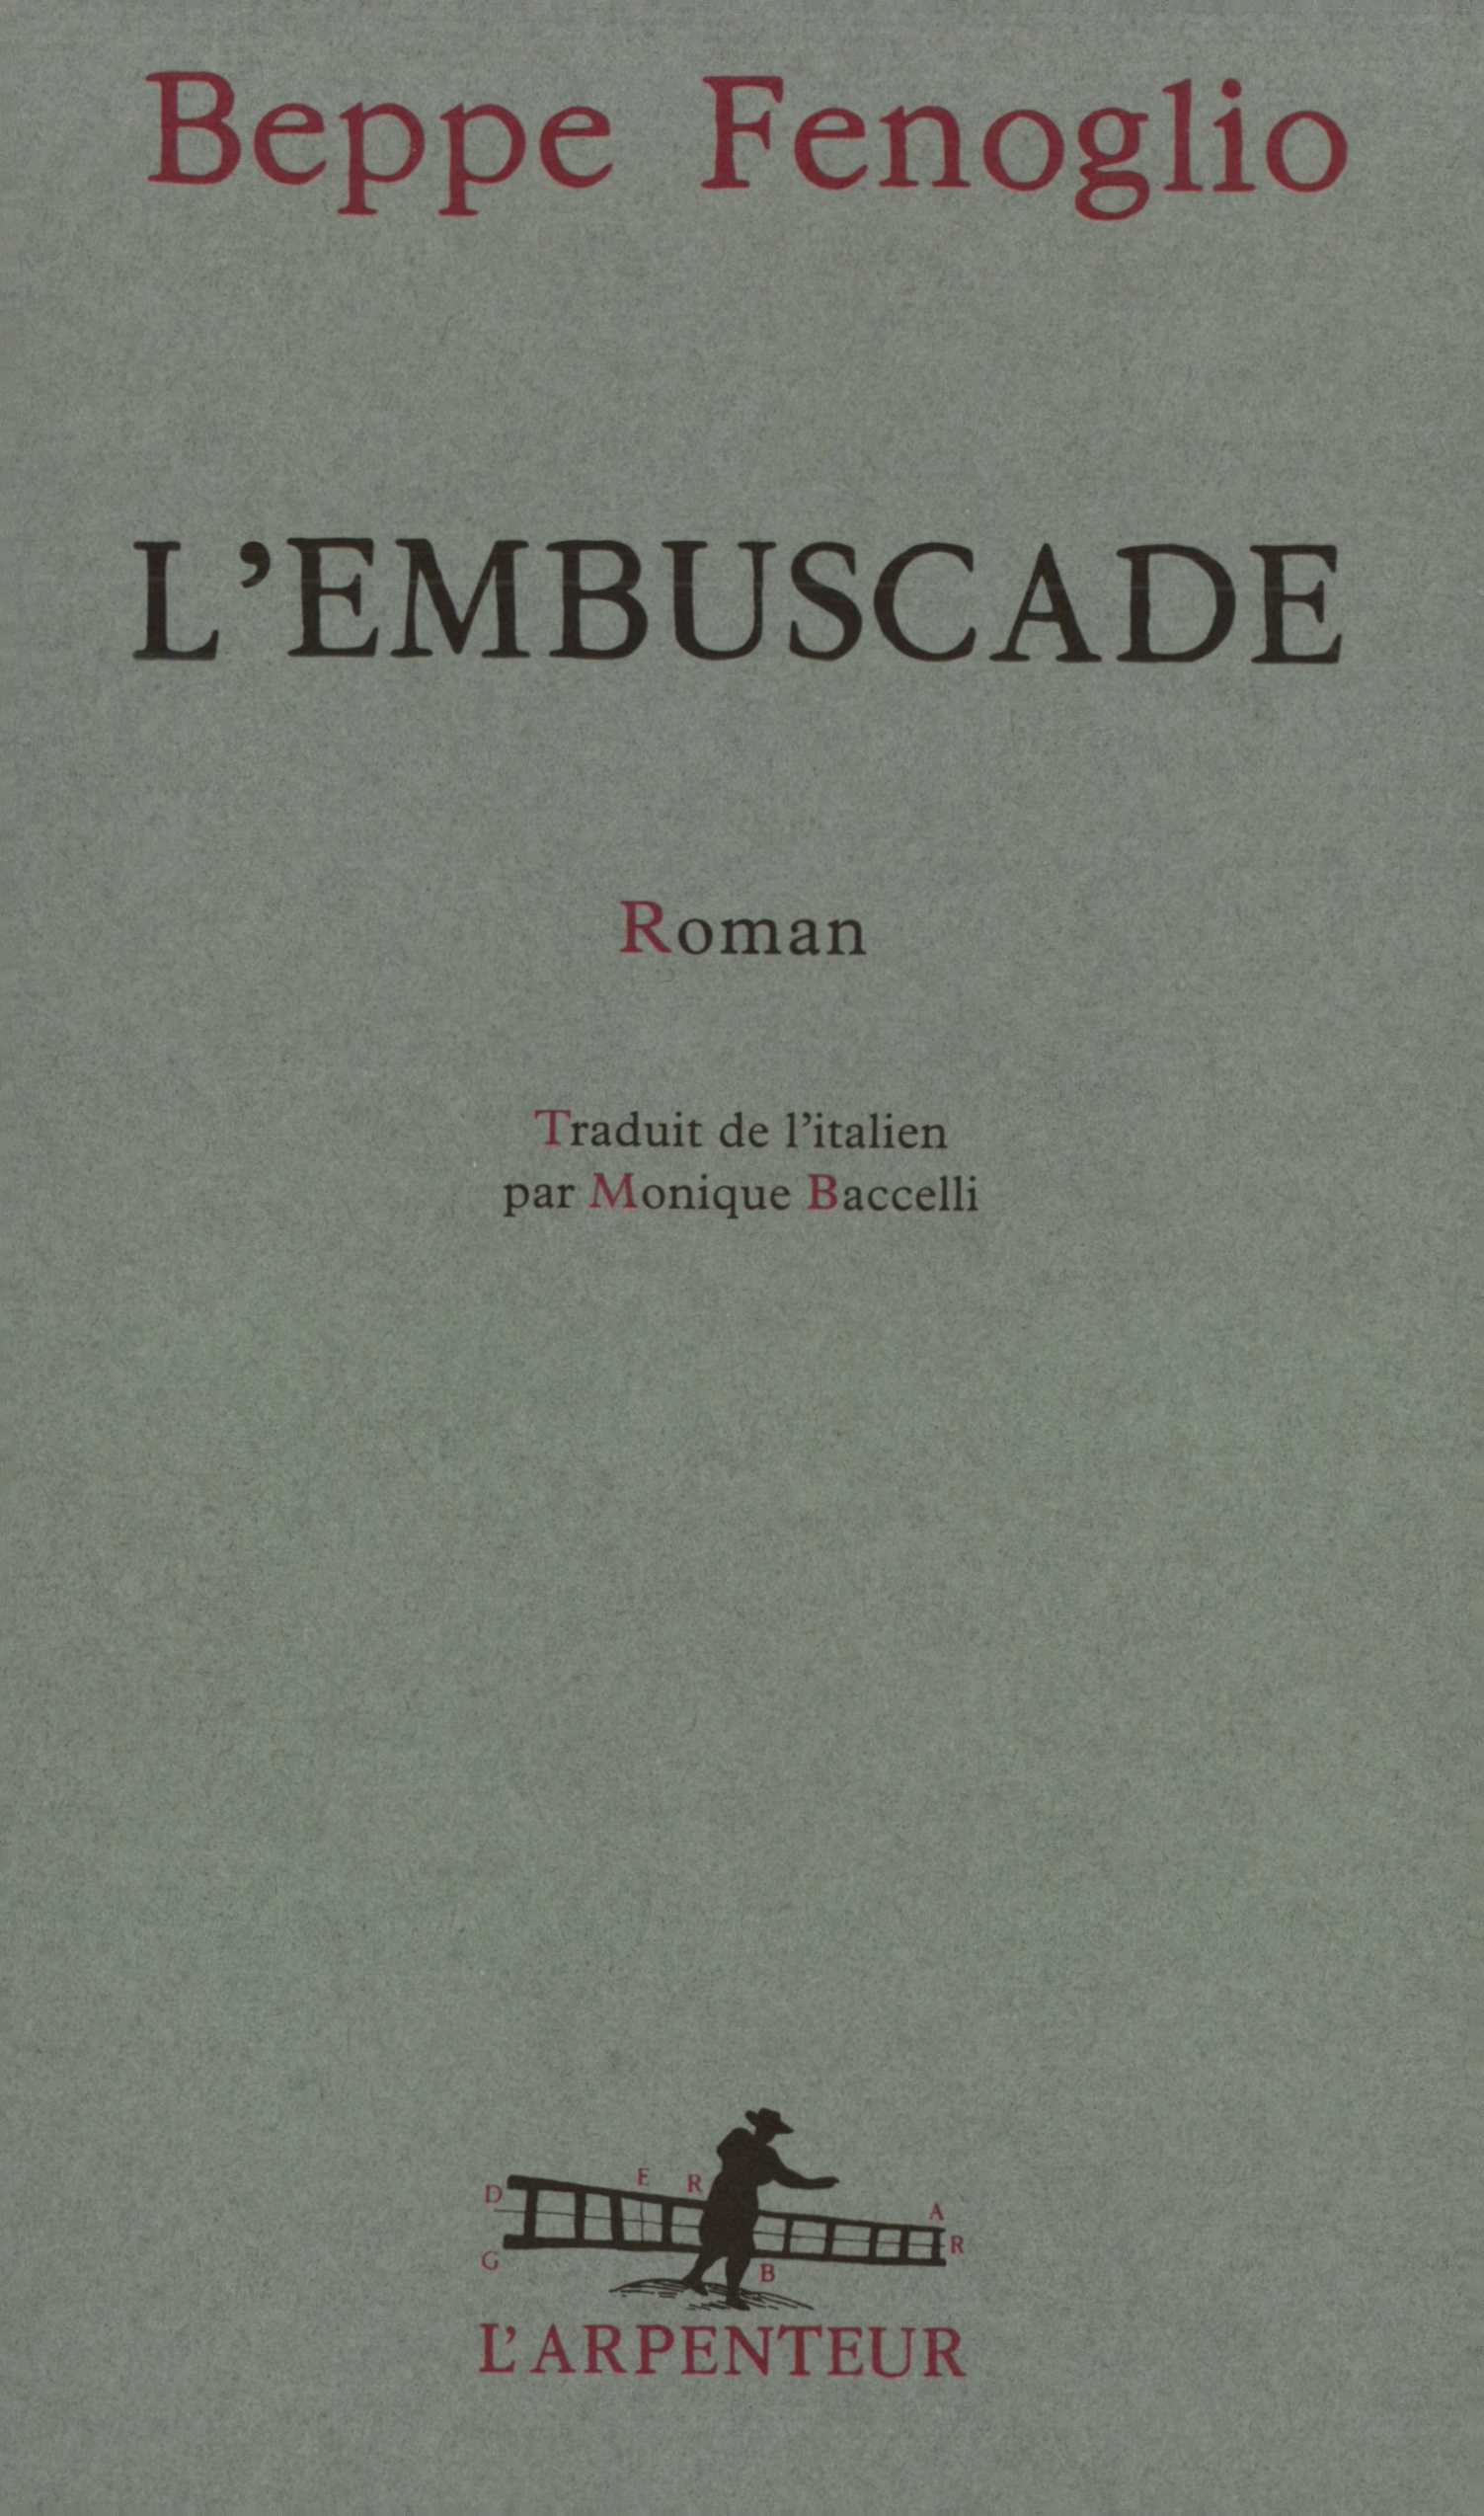 L'embuscade (9782070736799-front-cover)